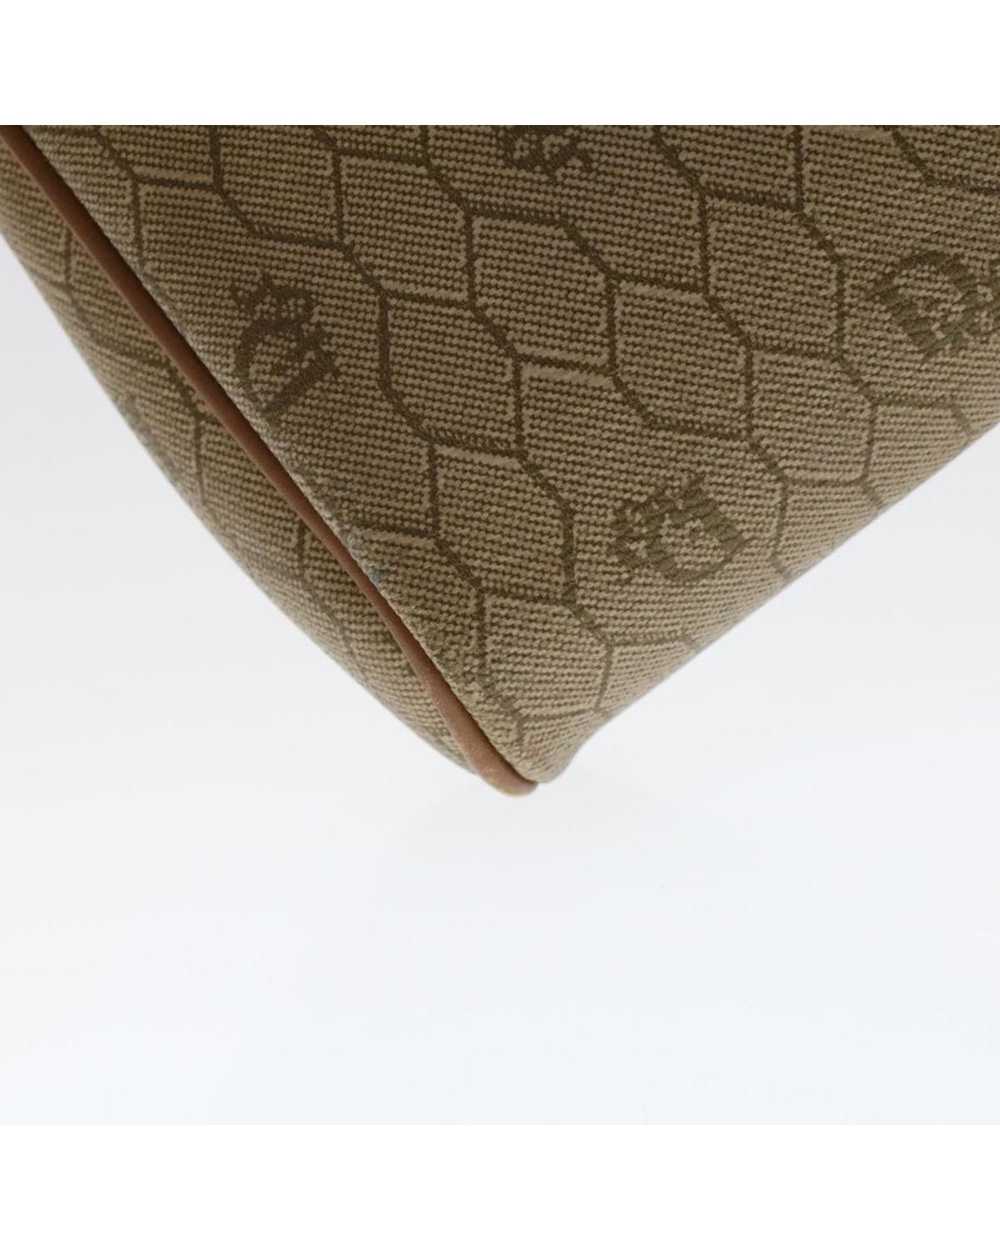 Dior Honeycomb Canvas Clutch by Dior - image 9